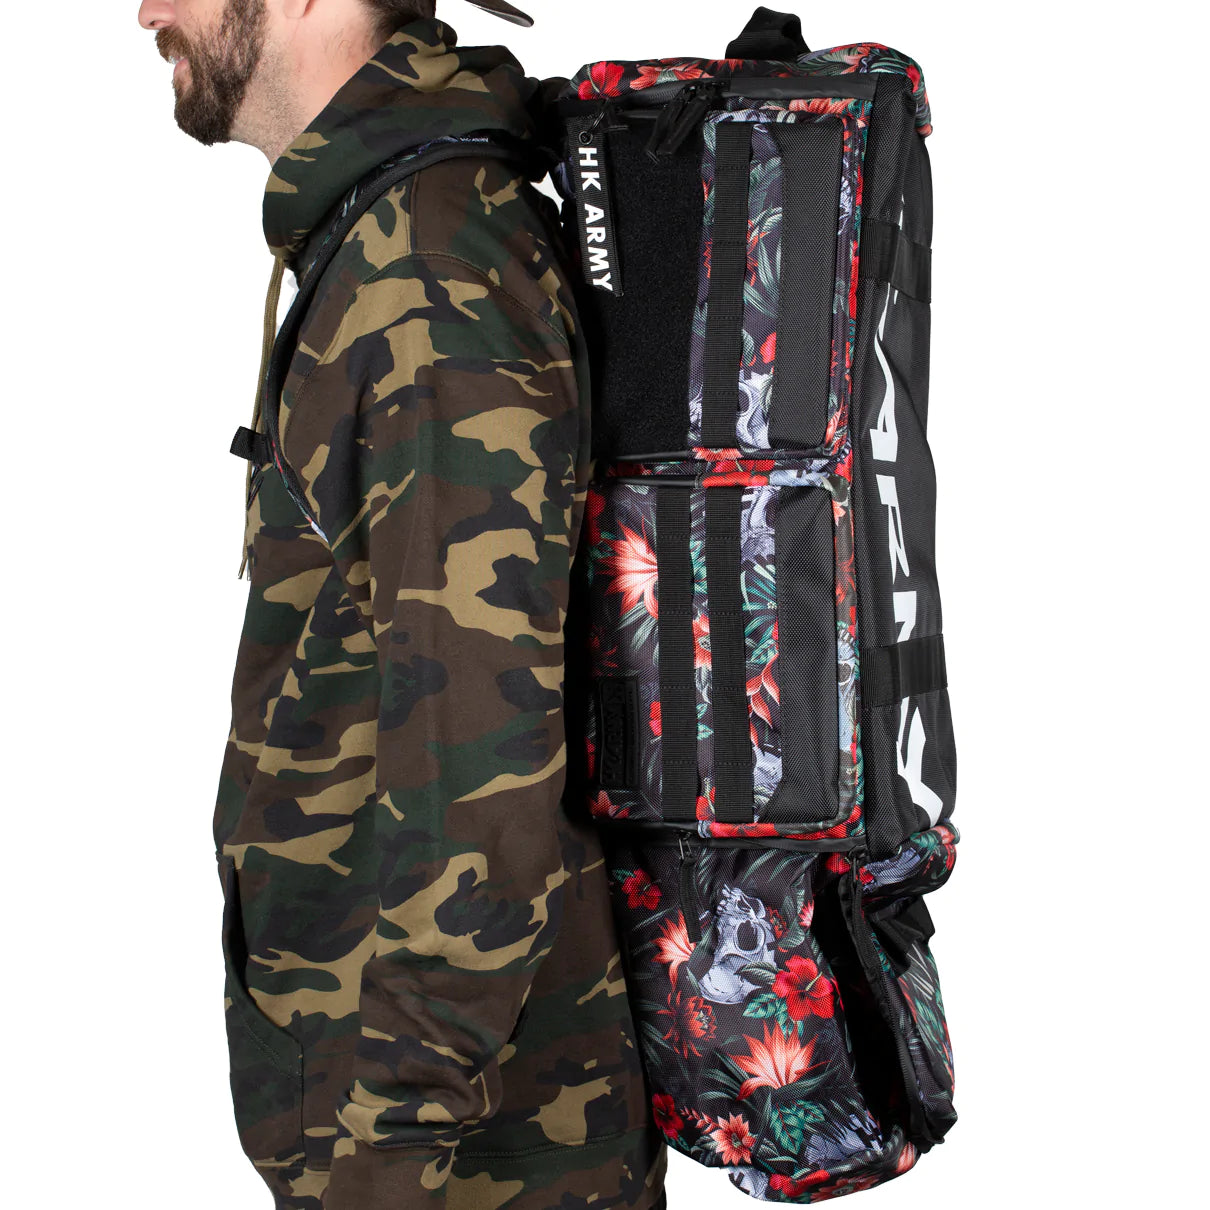 Expand 35L - Backpack - Tropical Skull | Paintball Gear Bag | Hk Army